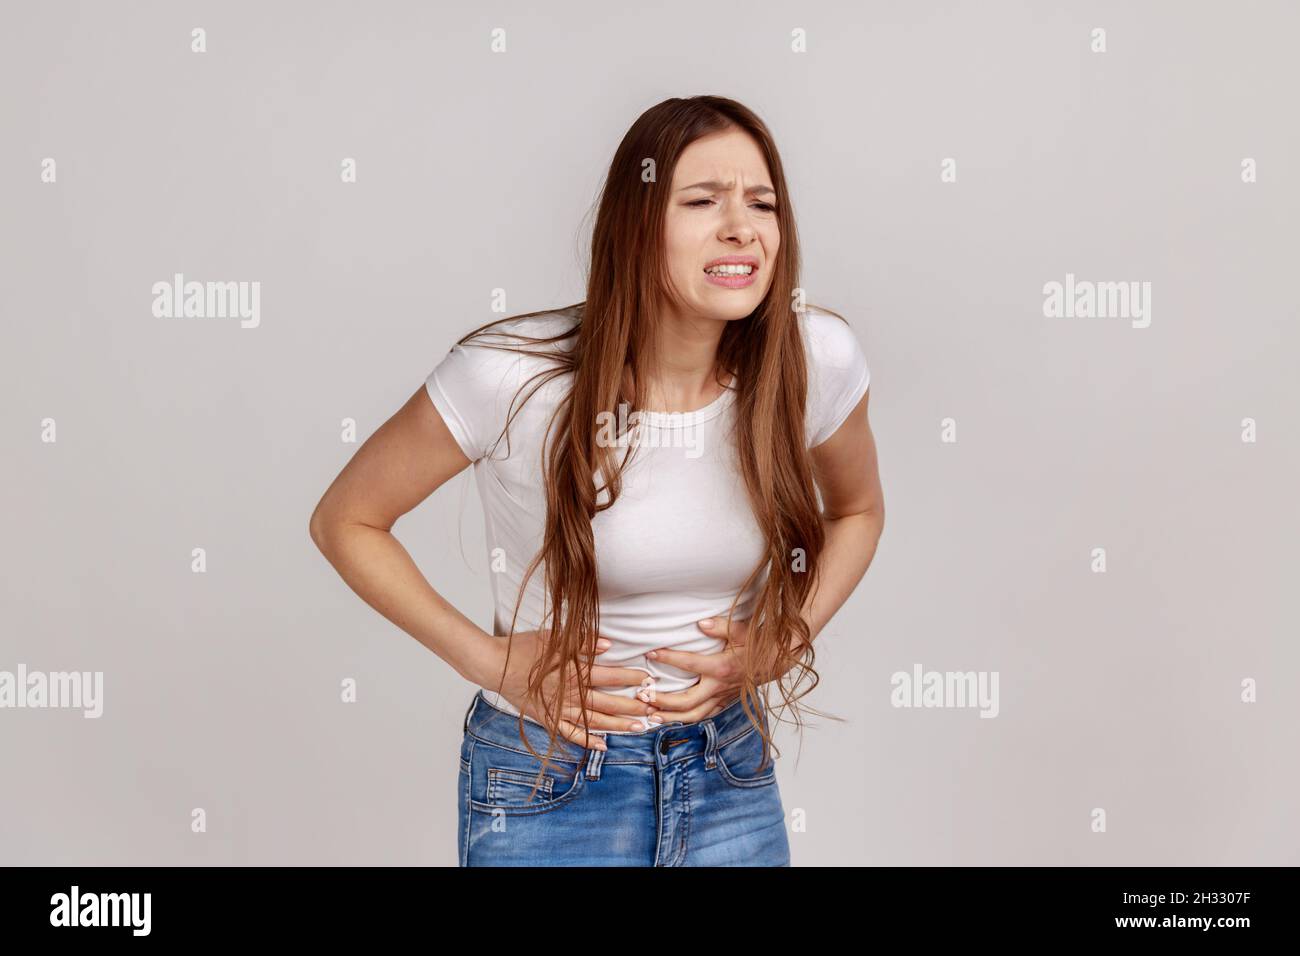 Portrait of unhealthy distressed woman clutching her belly, grimacing from acute abdominal pain, gastritis or constipation, wearing white T-shirt. Indoor studio shot isolated on gray background. Stock Photo